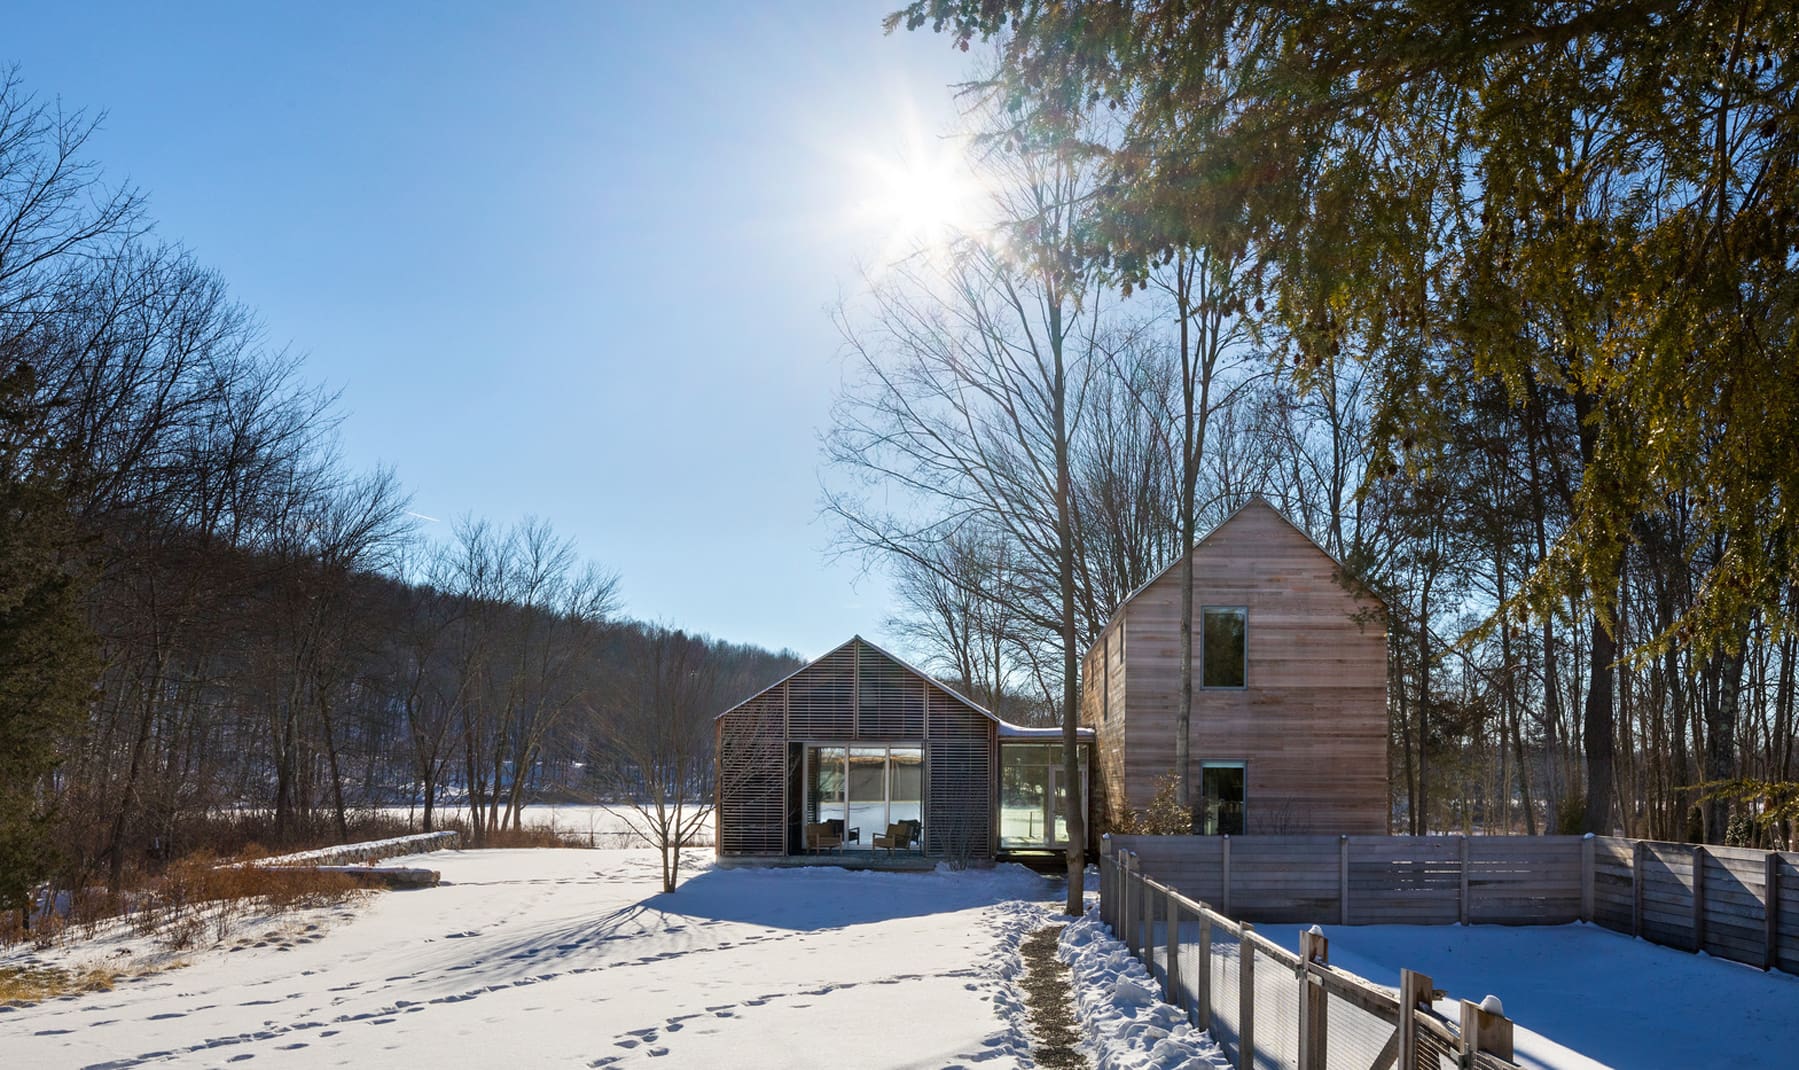 An exterior of a modern OpenHome in the snow from Lake Flato